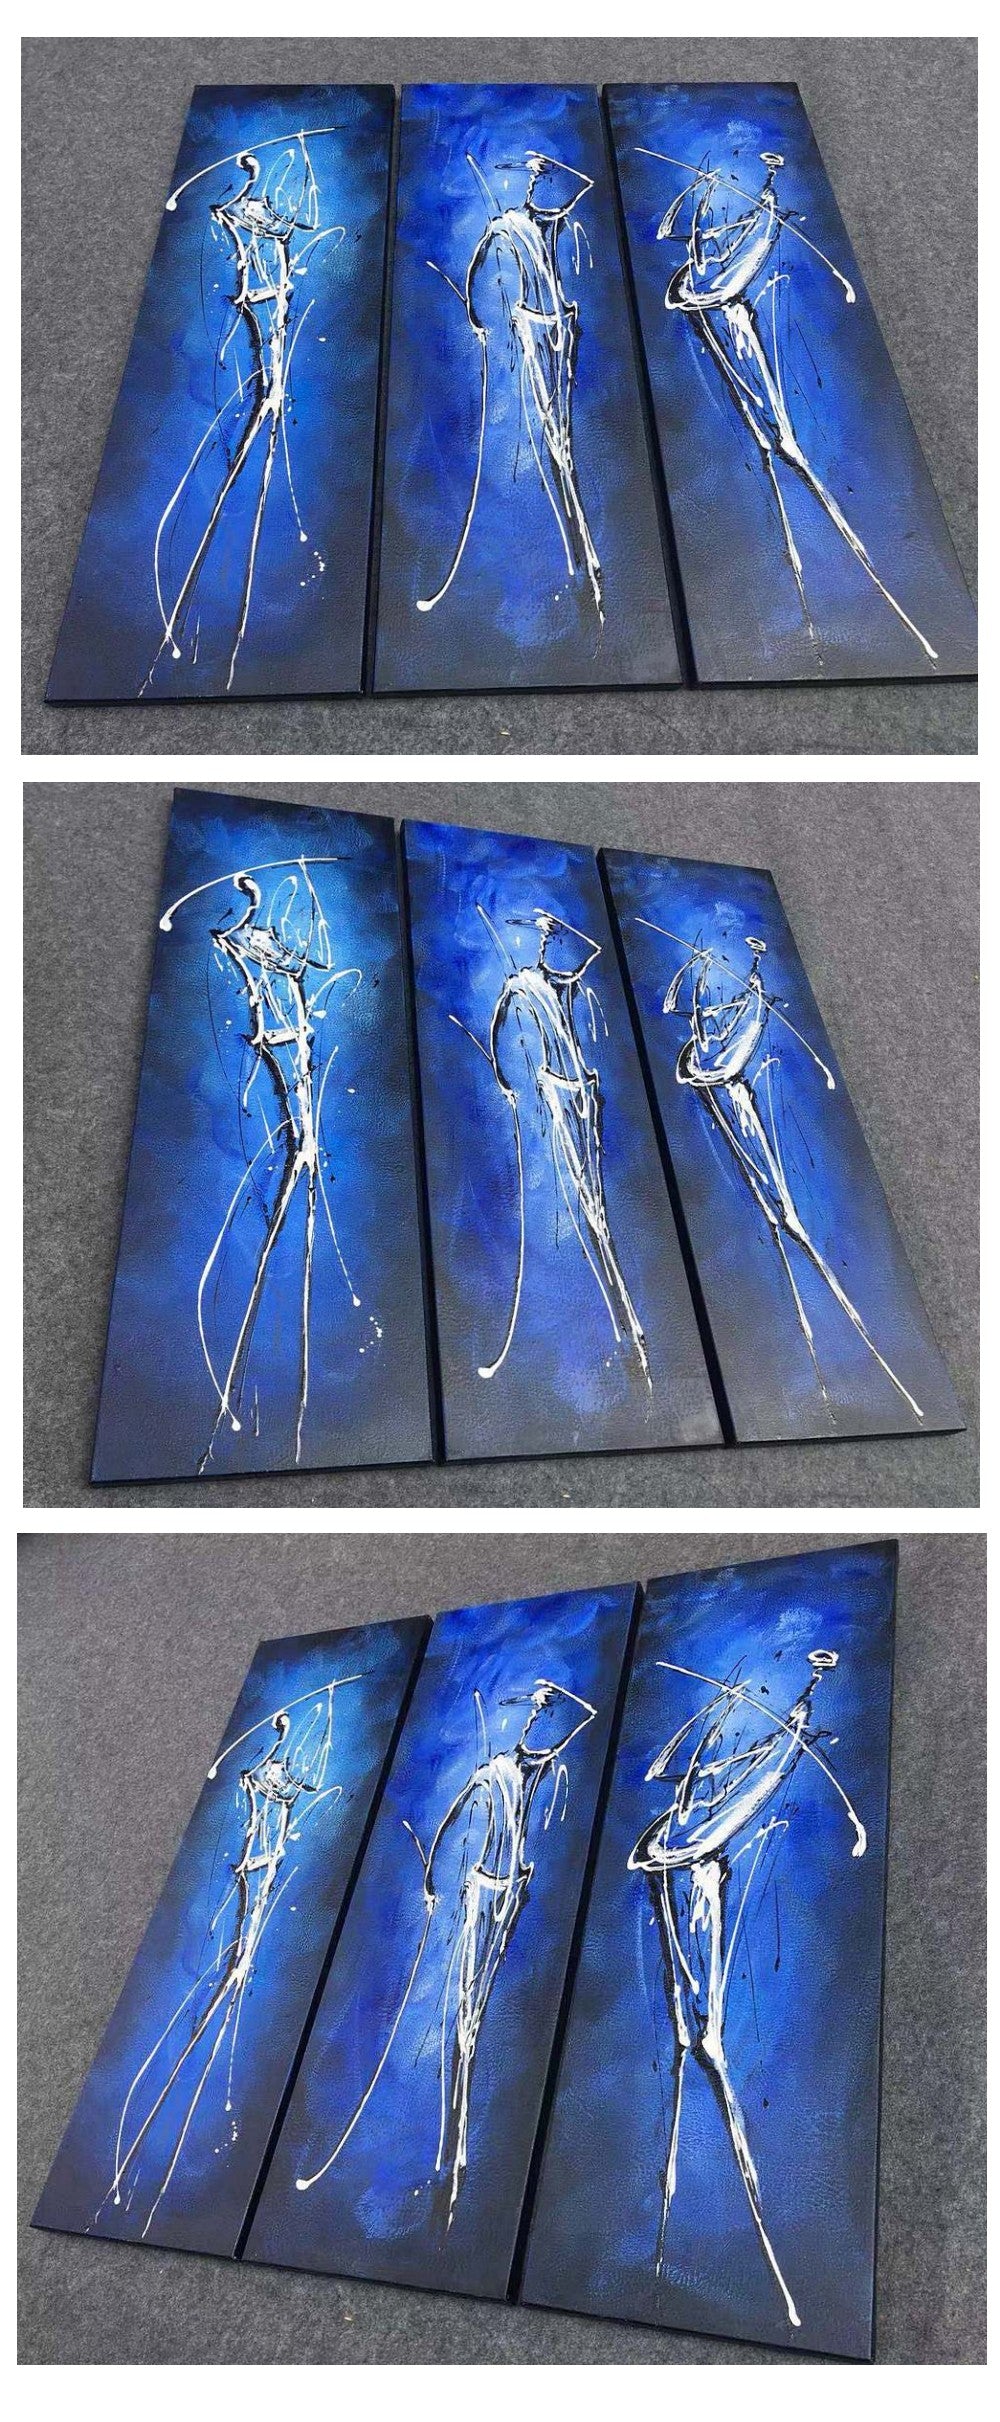 Painting Samples of Golf Player Painting, Hand Painted Canvas Painting